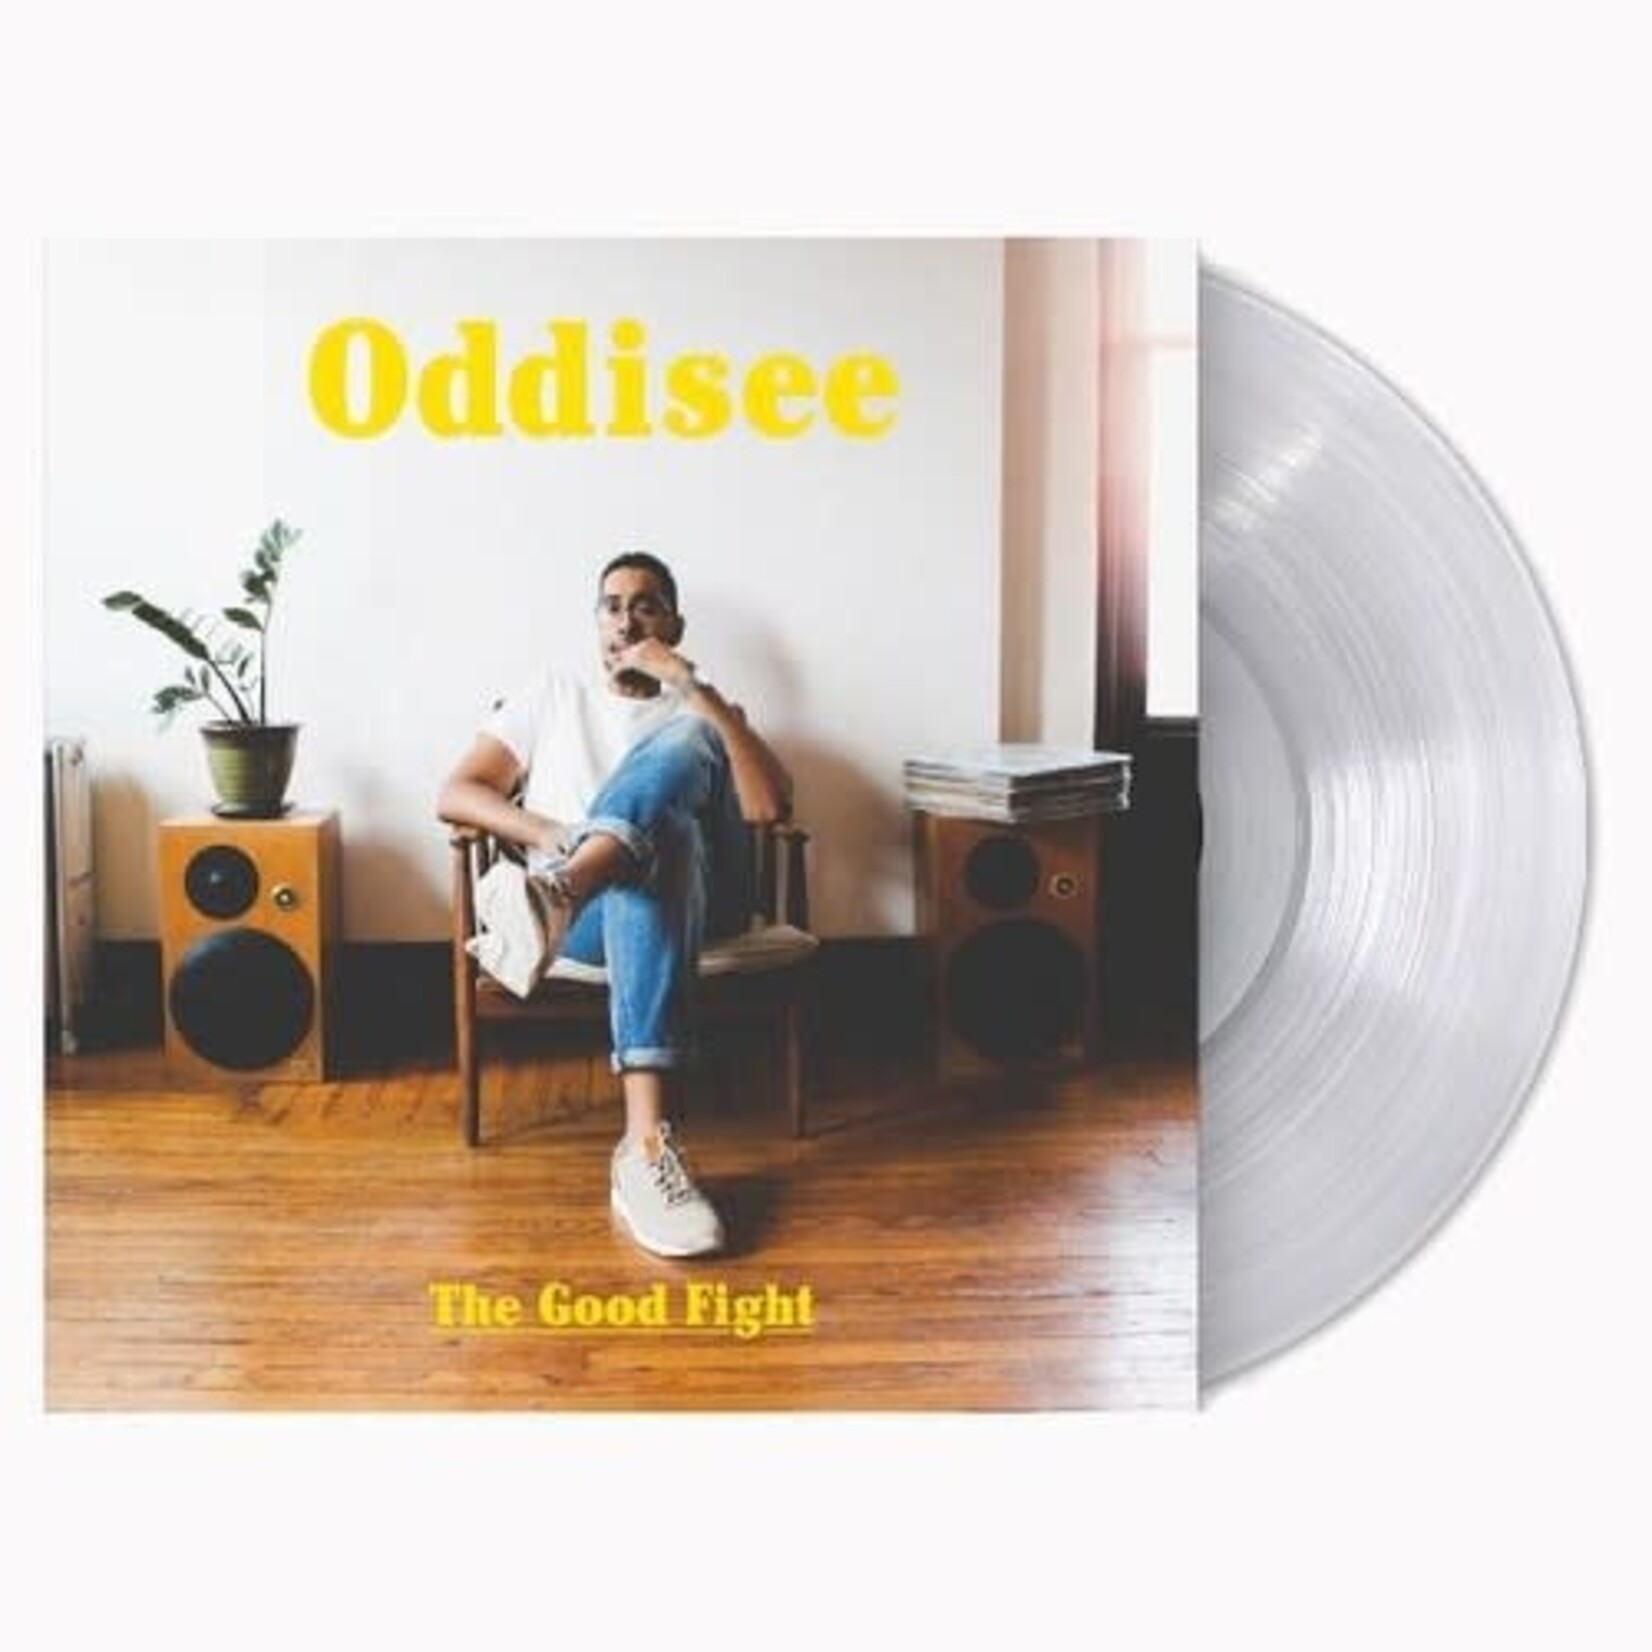 [New] Oddisee - The Good Fight (ultra clear vinyl)